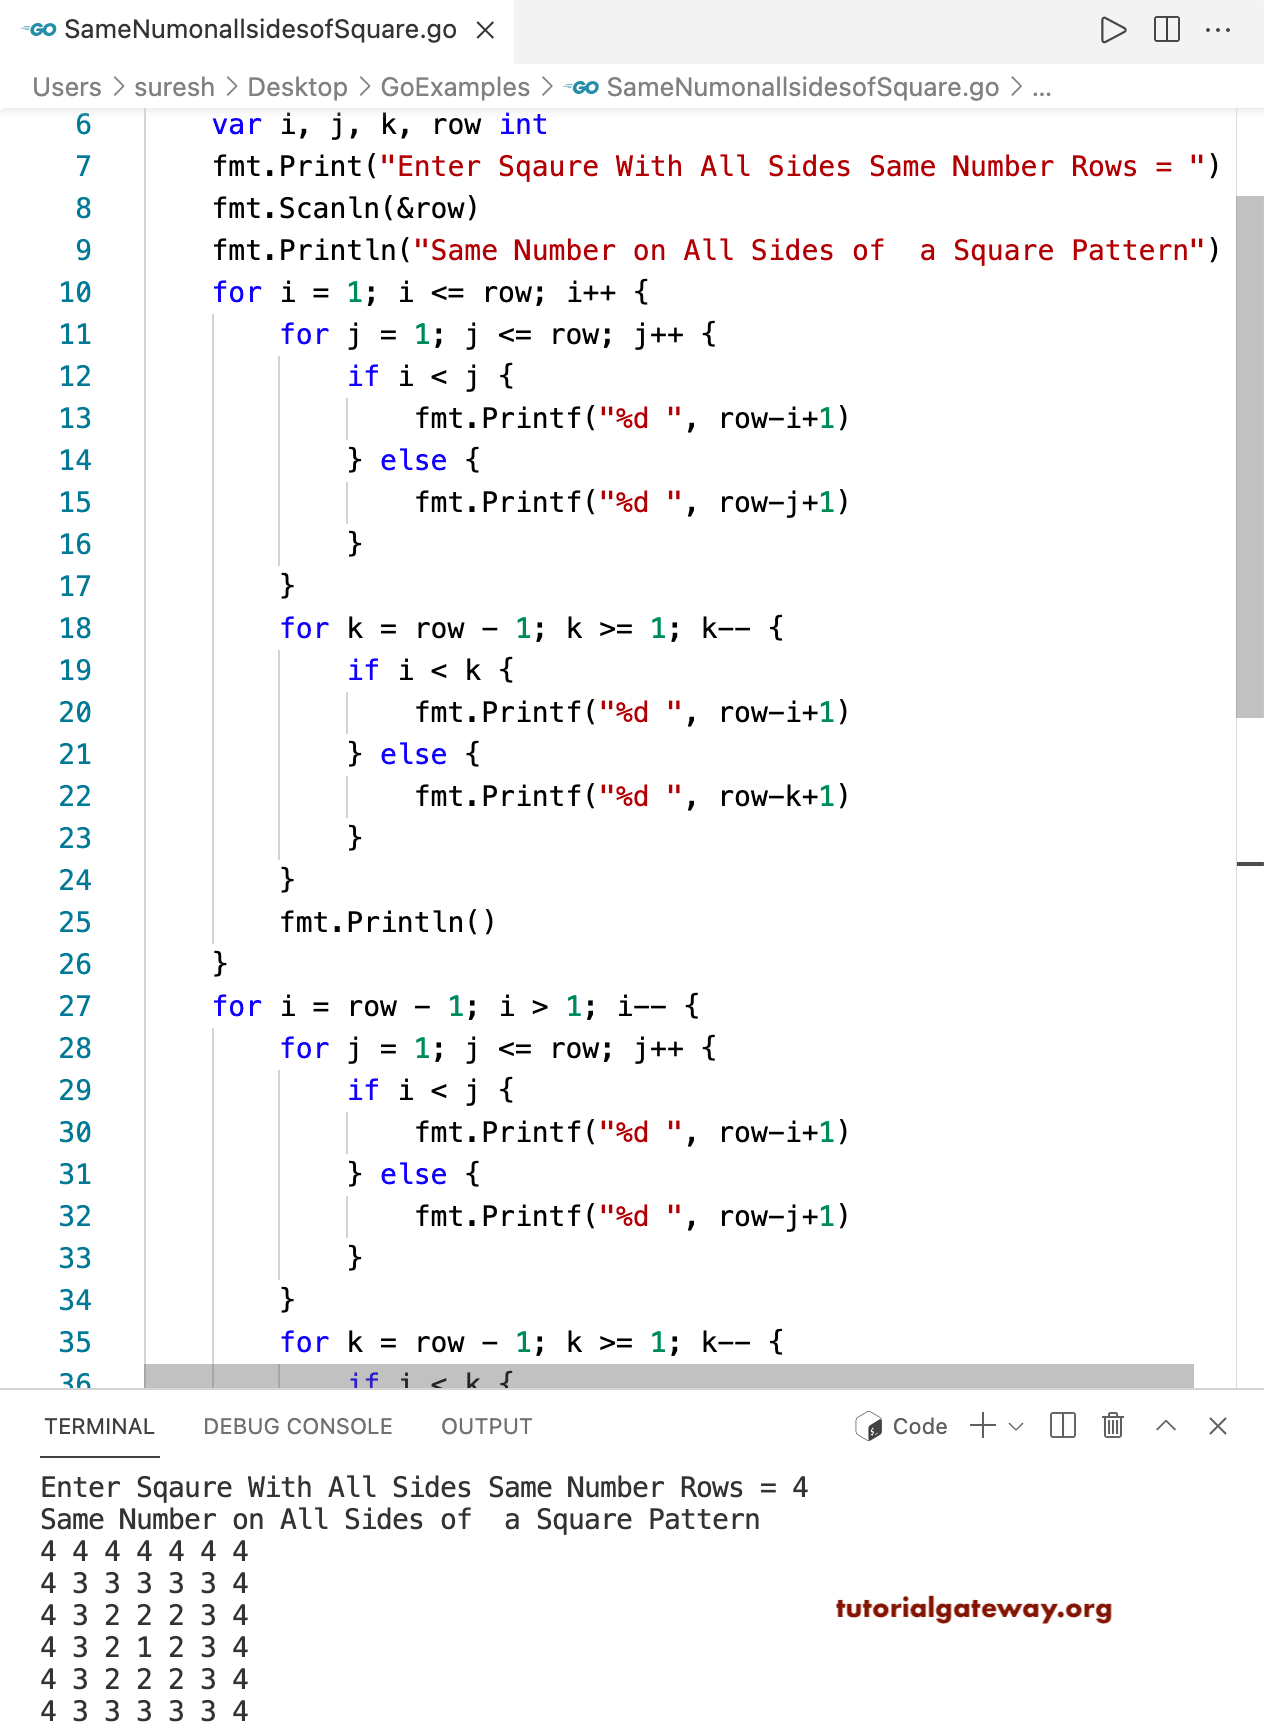 Go Program to Print Same Numbers on all Sides of a Square